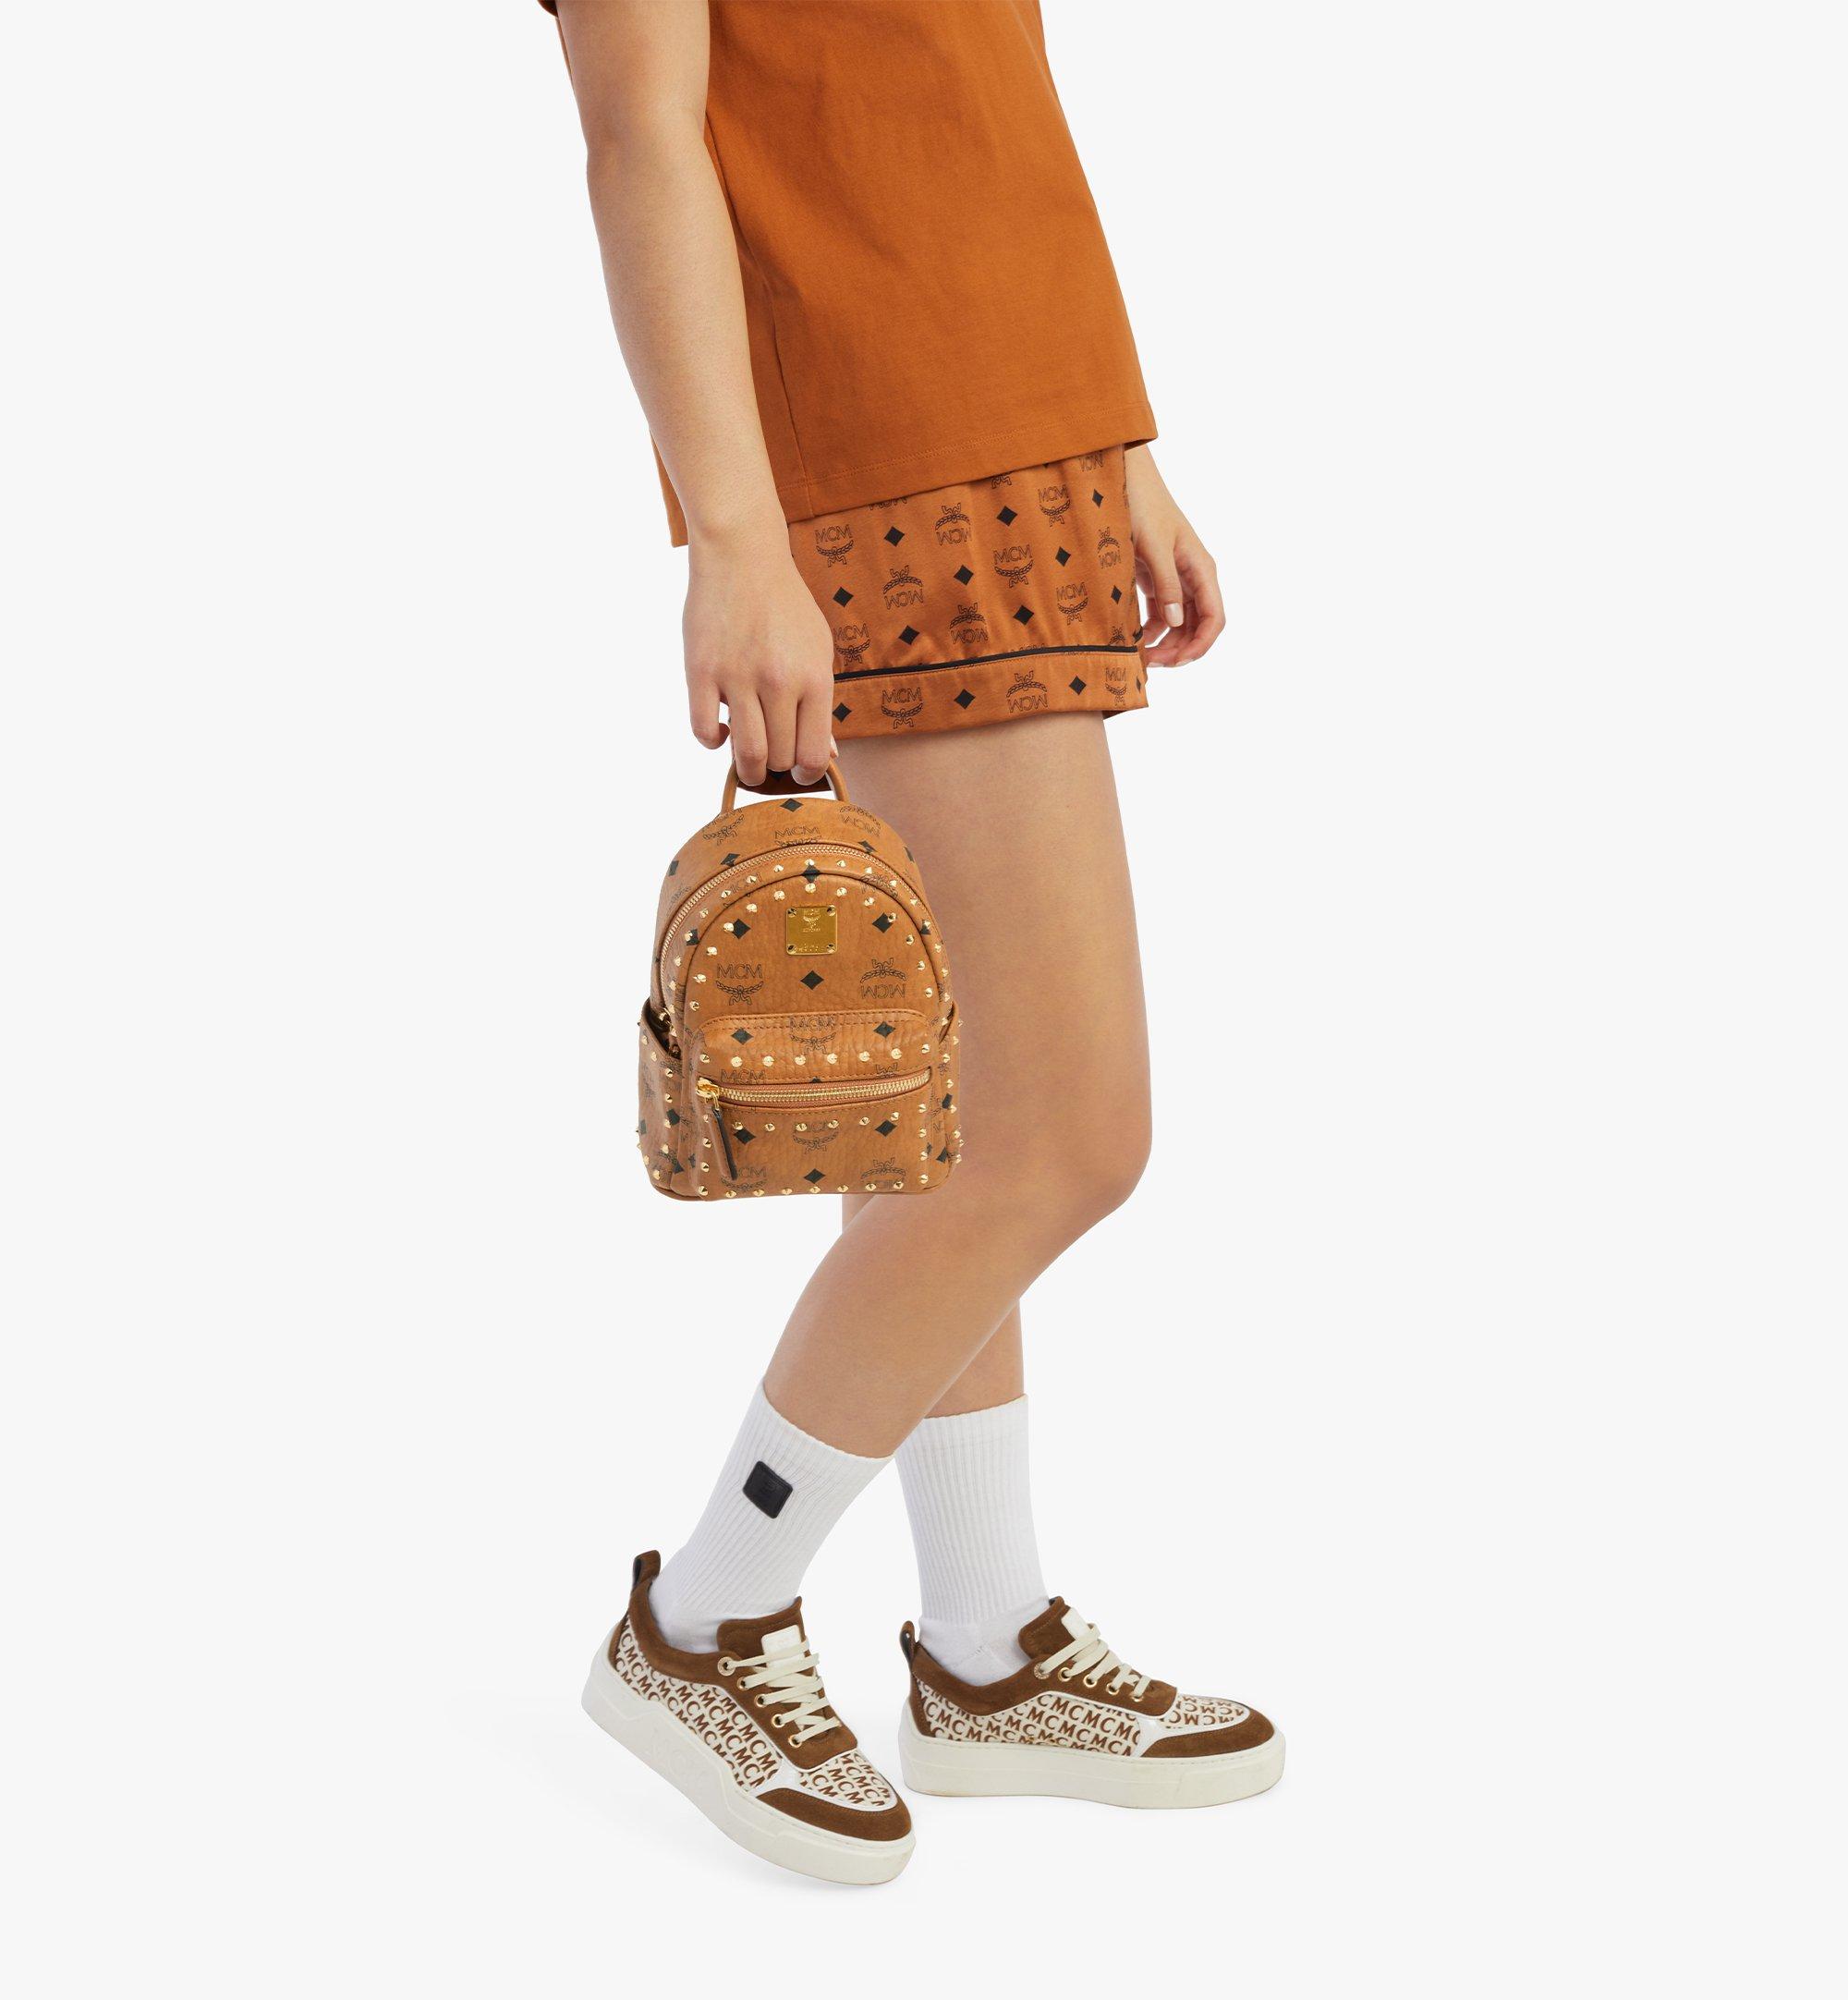 MCM Stark Bebe Boo Backpack in Studded Outline Visetos Cognac MMKAAVE05CO001 Alternate View 2